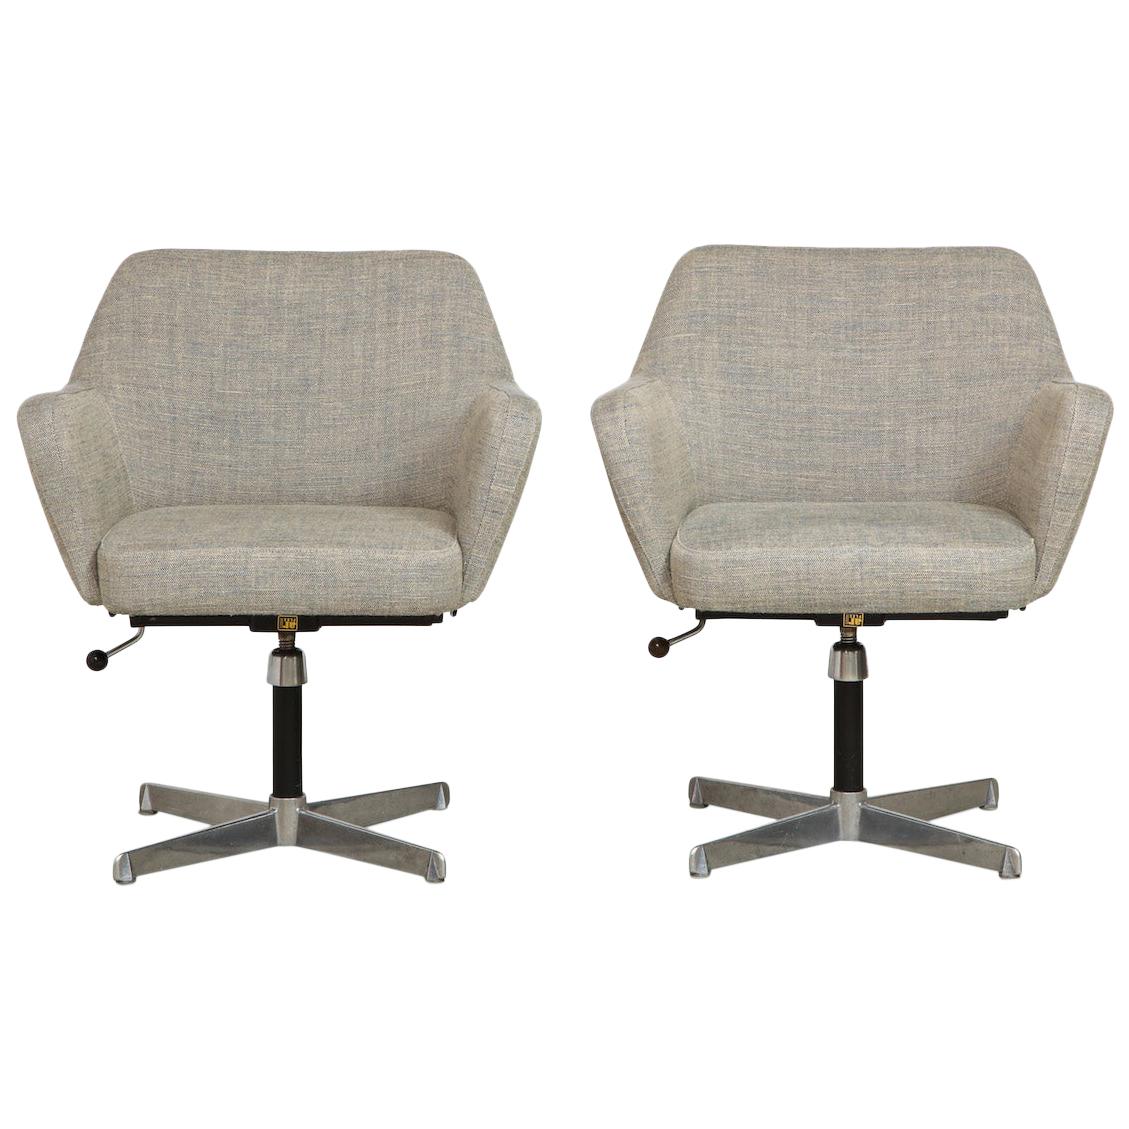 Gio Ponti & Alberto Roselli for Arflex, Pair of "Airone" Model Office Chairs